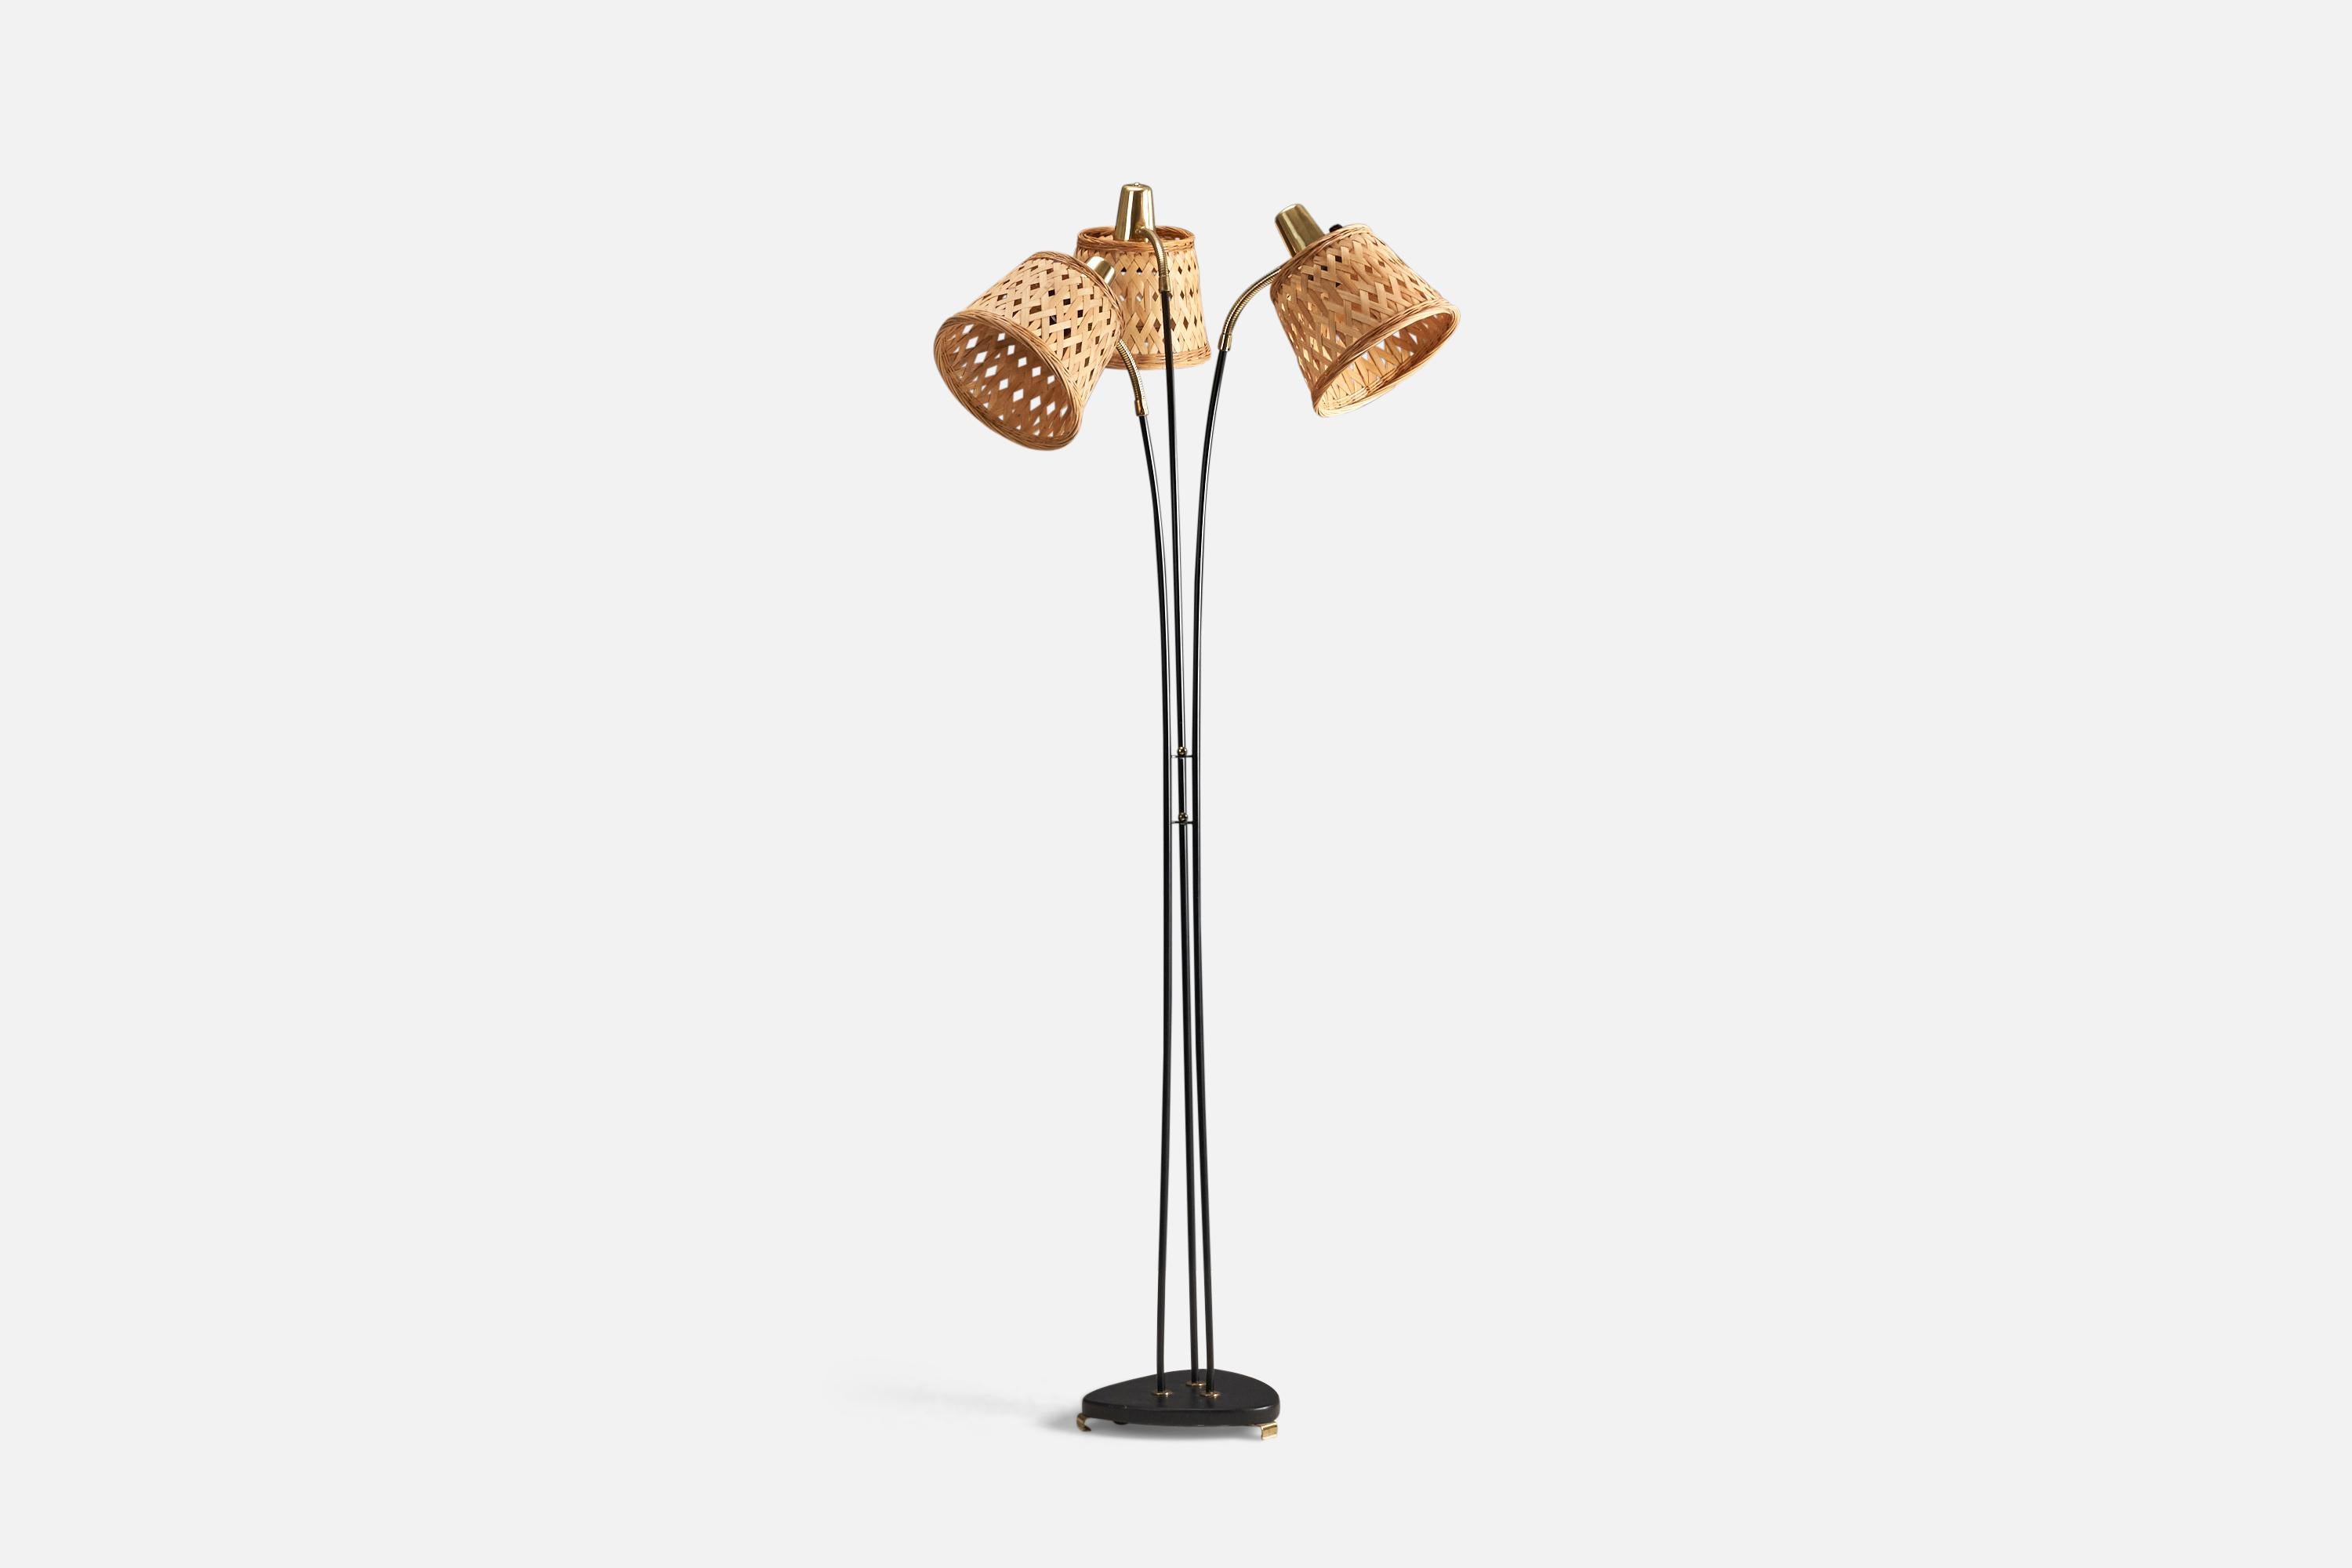 A metal, brass and rattan floor lamp designed and produced by Eskilstuna Elektrofabrik, Sweden, 1950s.

Sockets take standard E-26 medium base bulbs.

There is no maximum wattage stated on the fixture.